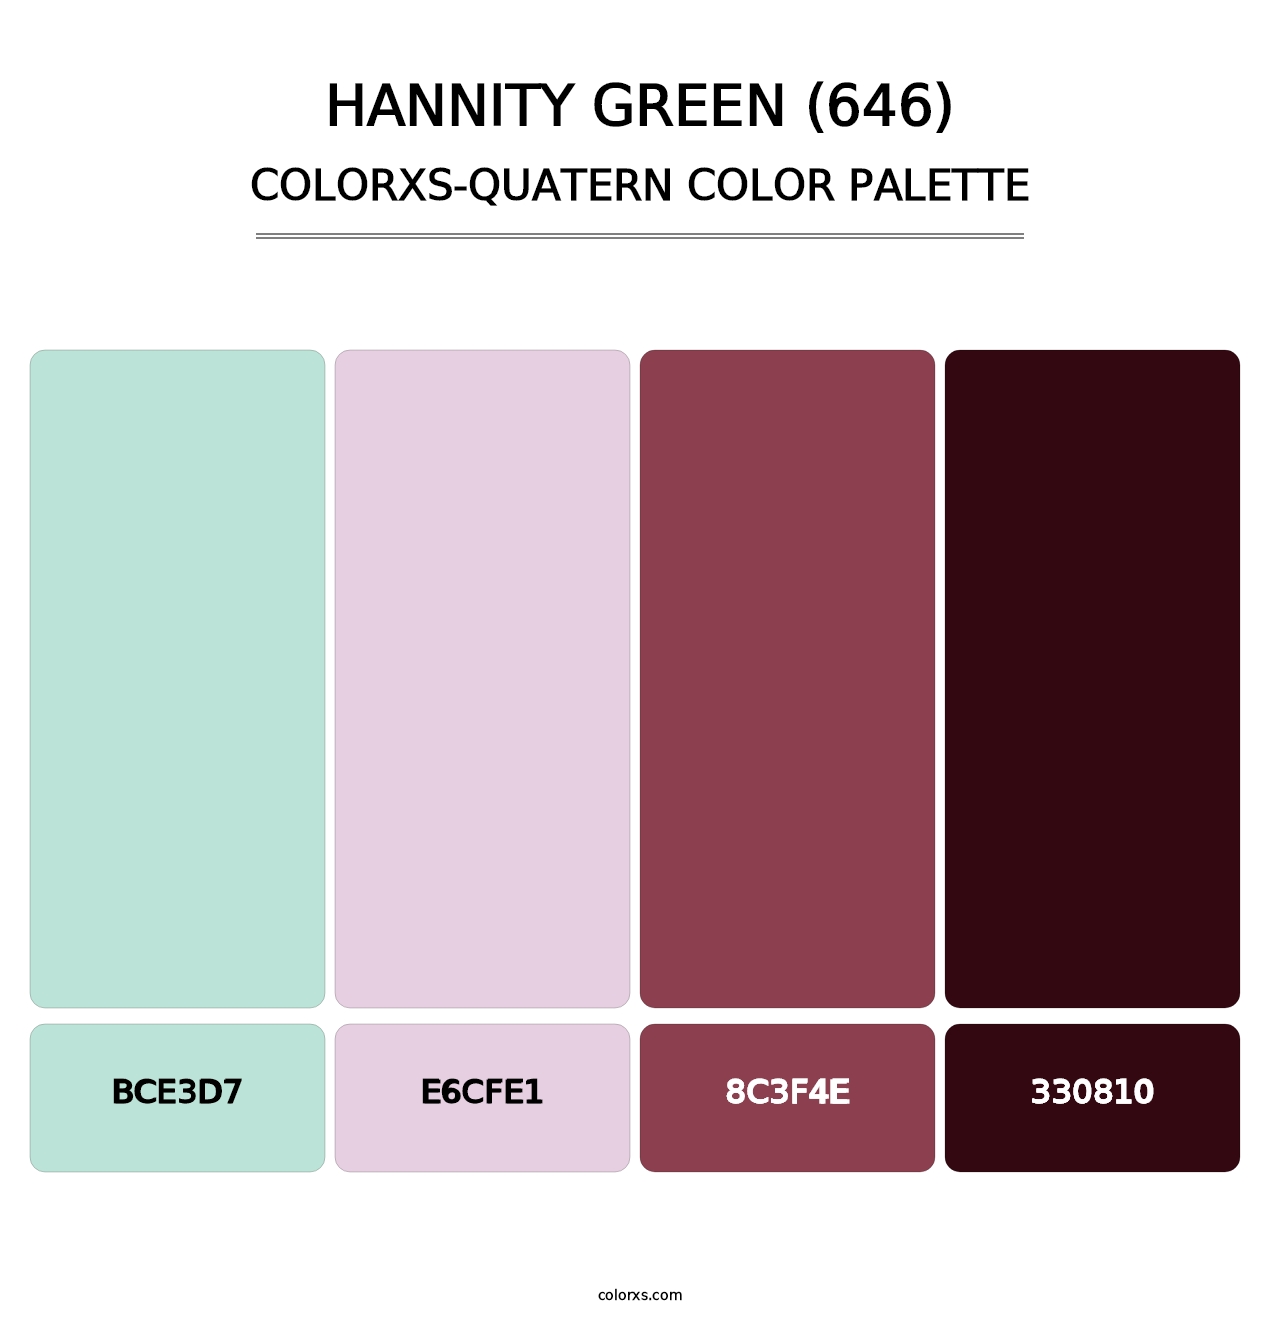 Hannity Green (646) - Colorxs Quatern Palette